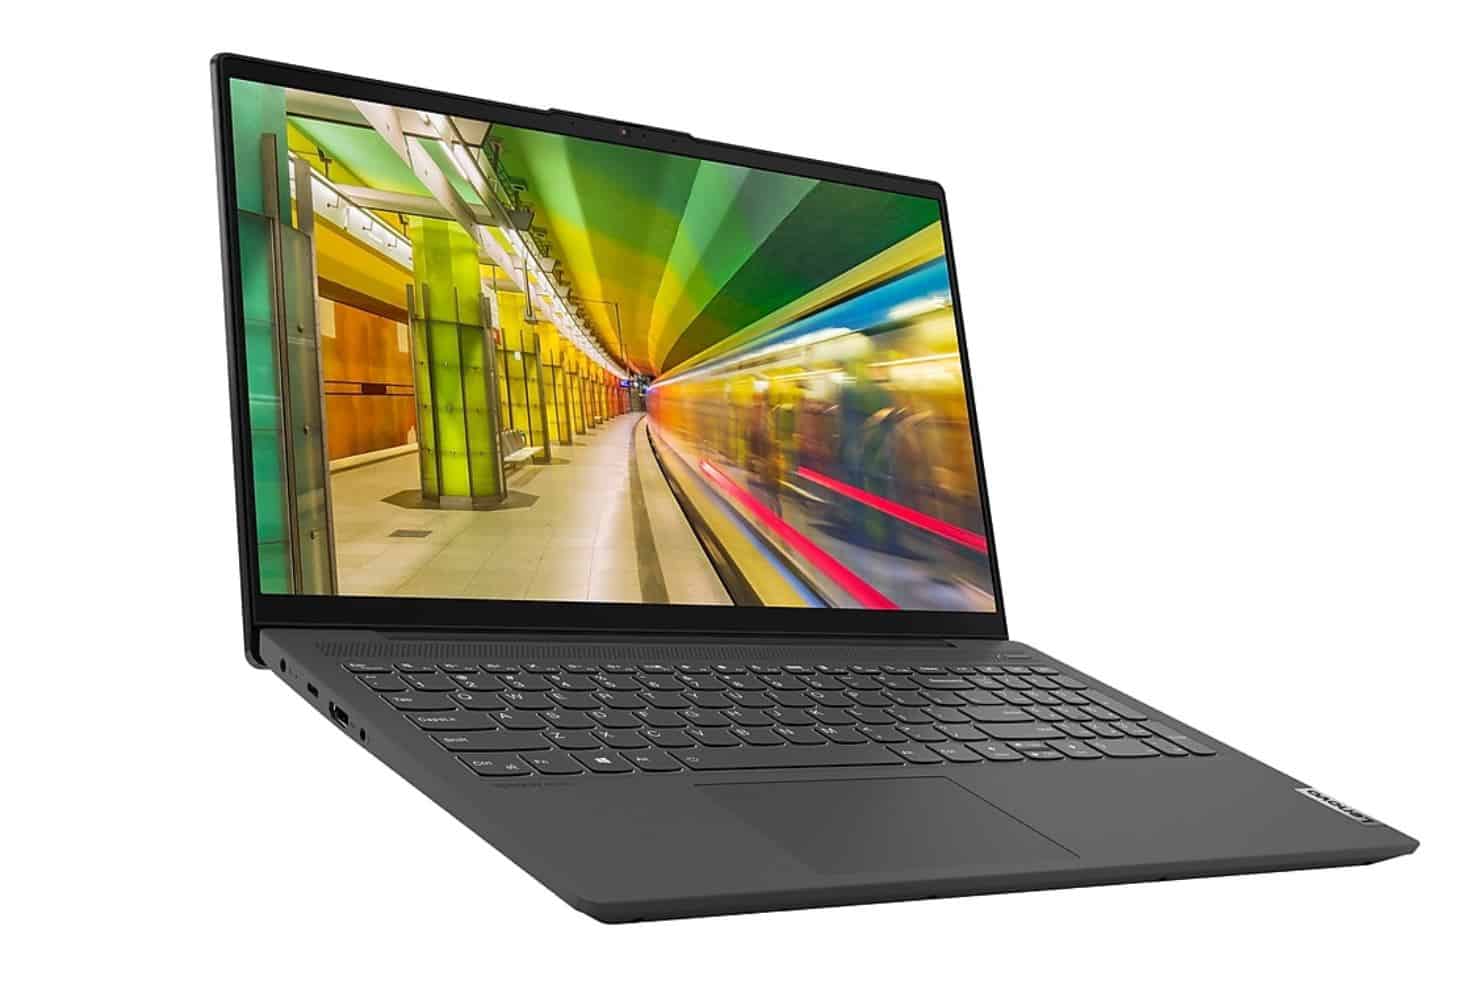 Deal Alert Lenovo Ideapad Laptop With 10th Gen Intel Core I7 16gb Ram And 512gb Ssd Available For 649 Mspoweruser